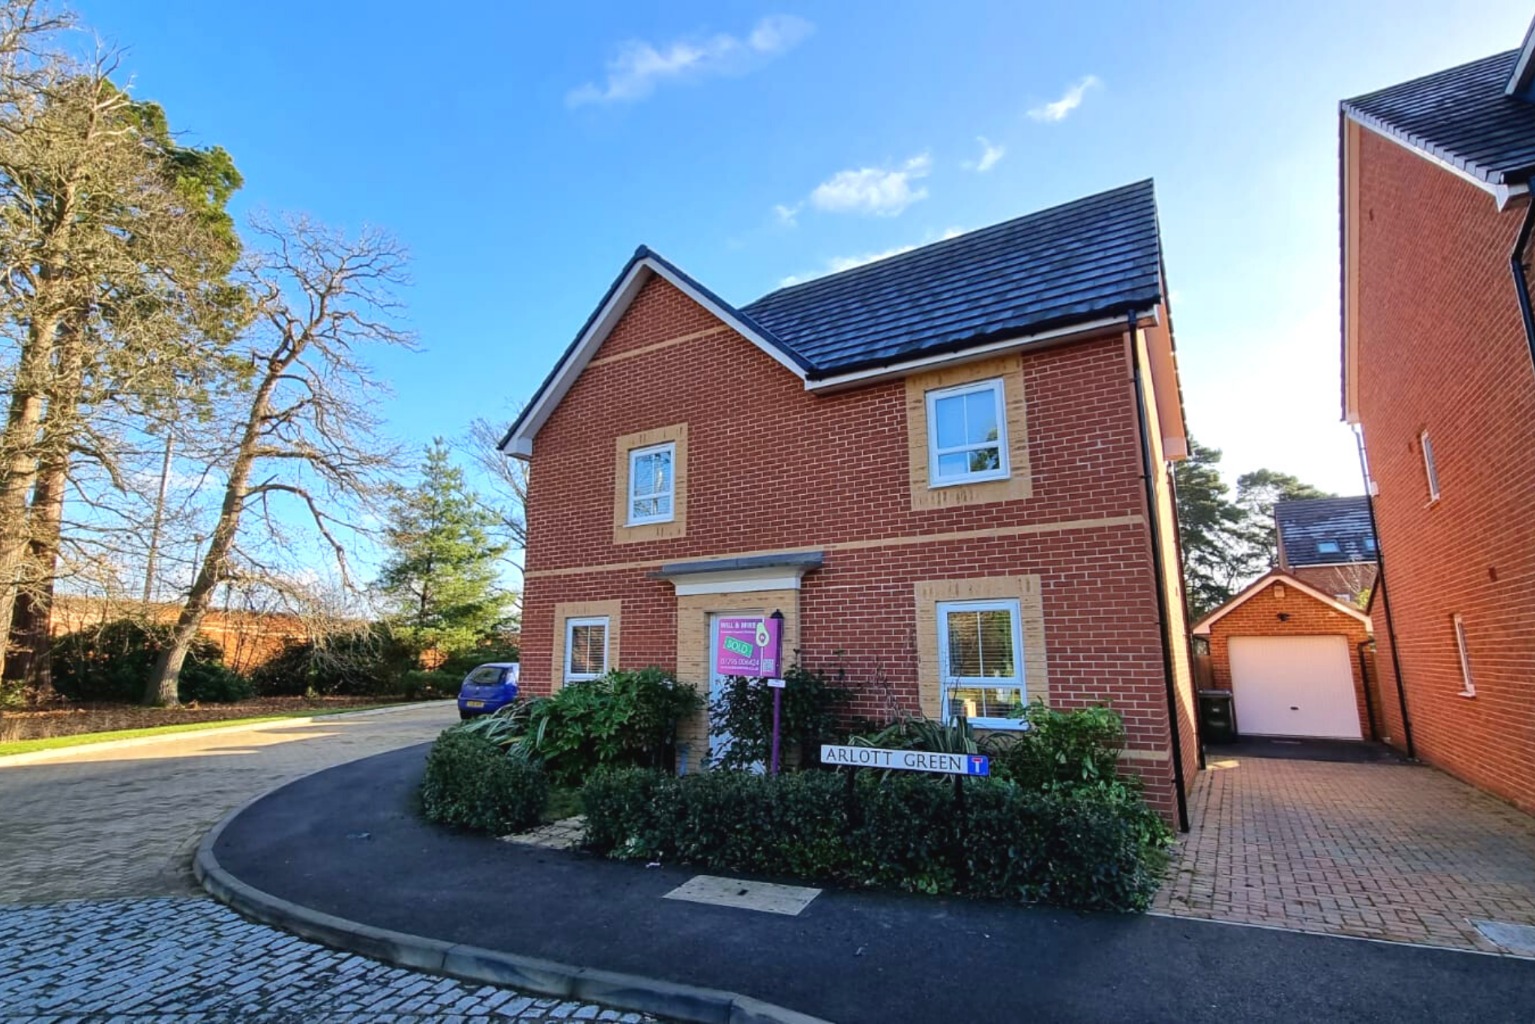 4 bed detached house for sale - Property Image 1